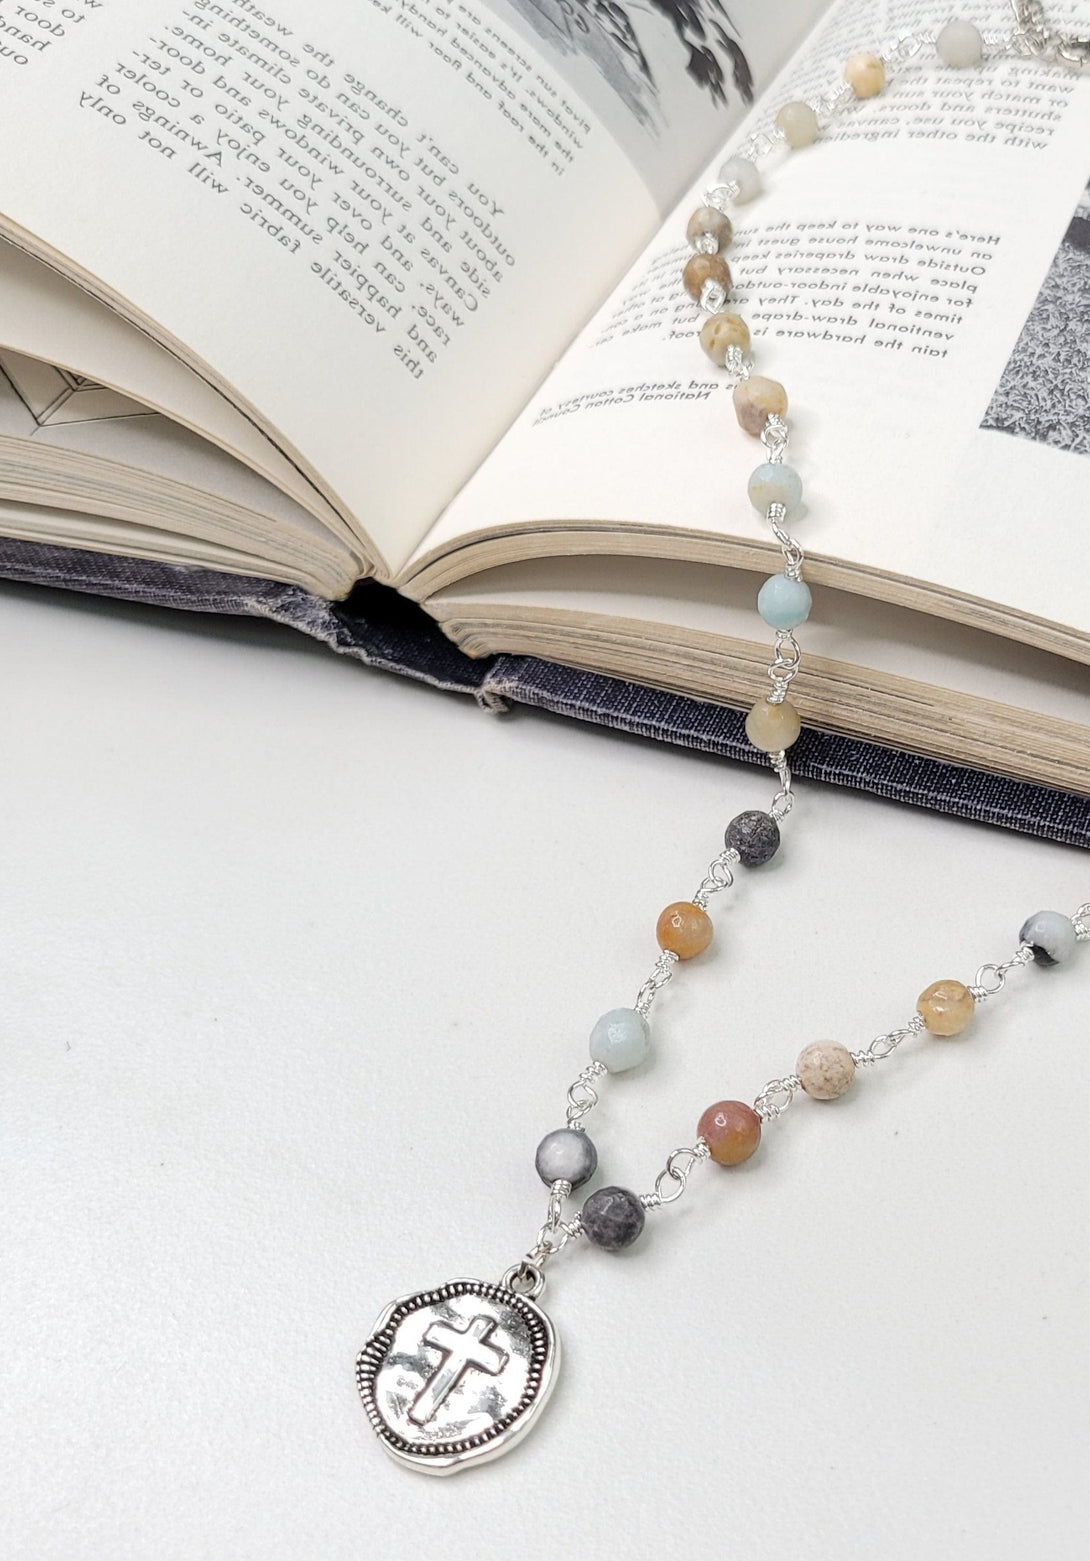 Beloved Gemstone Necklace with Cross Charm